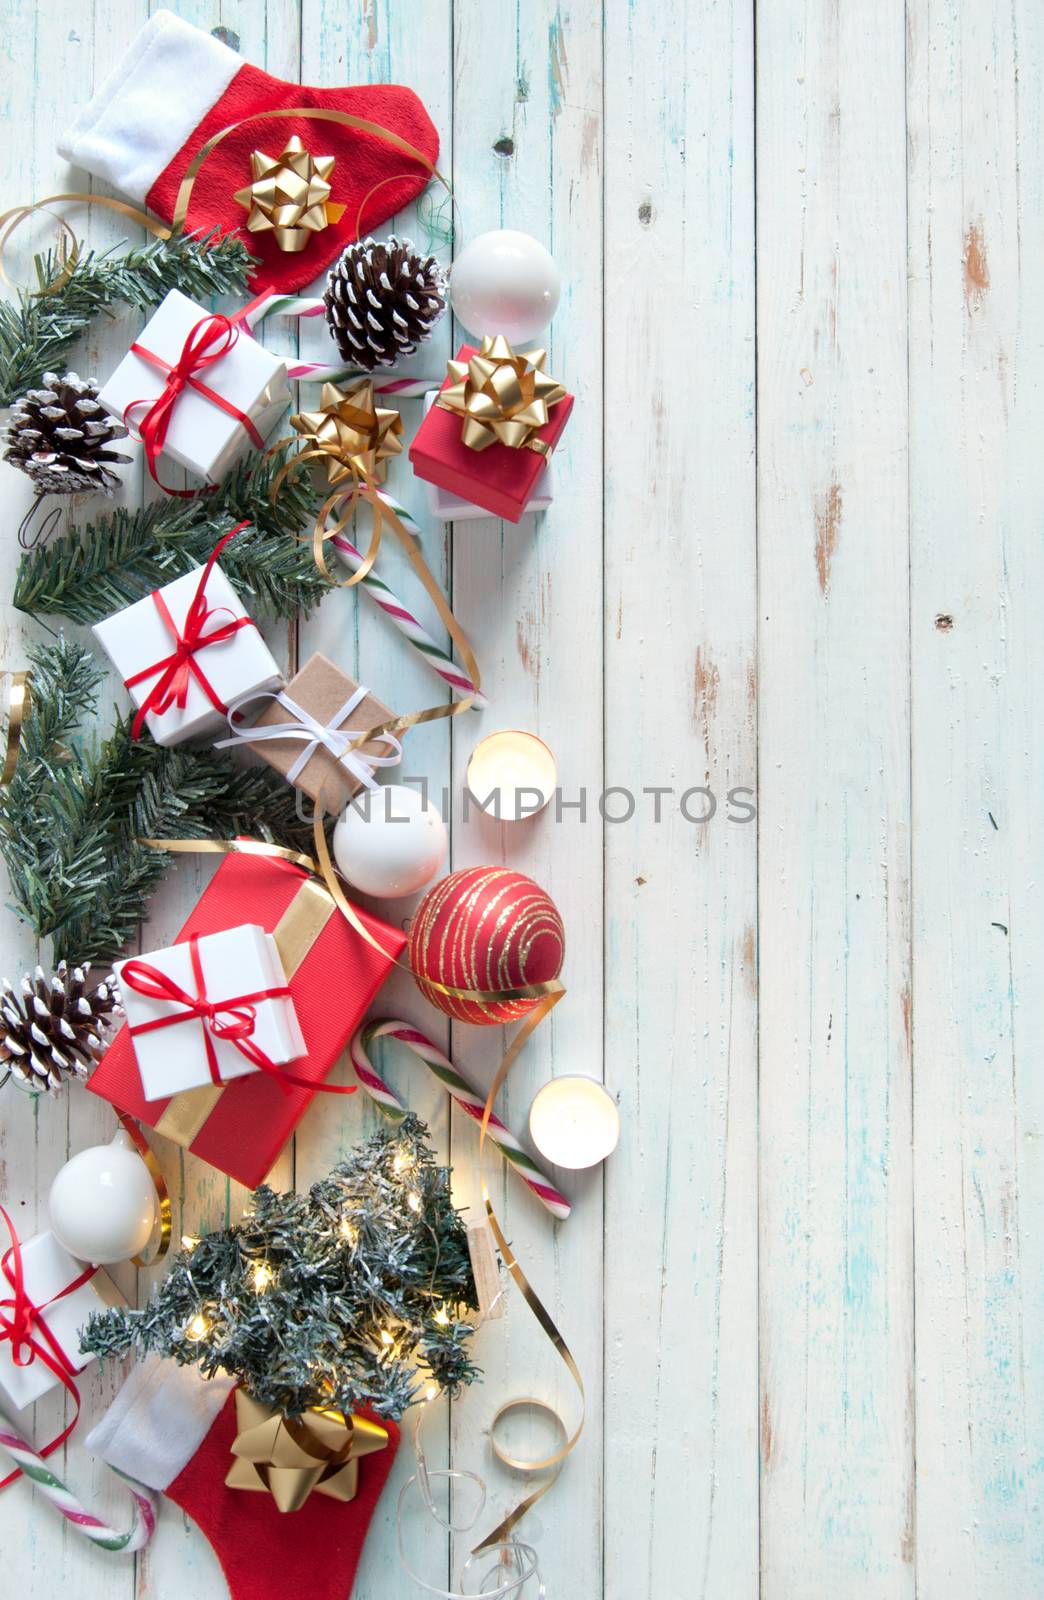 Christmas gifts and decorations with candles on a wooden background